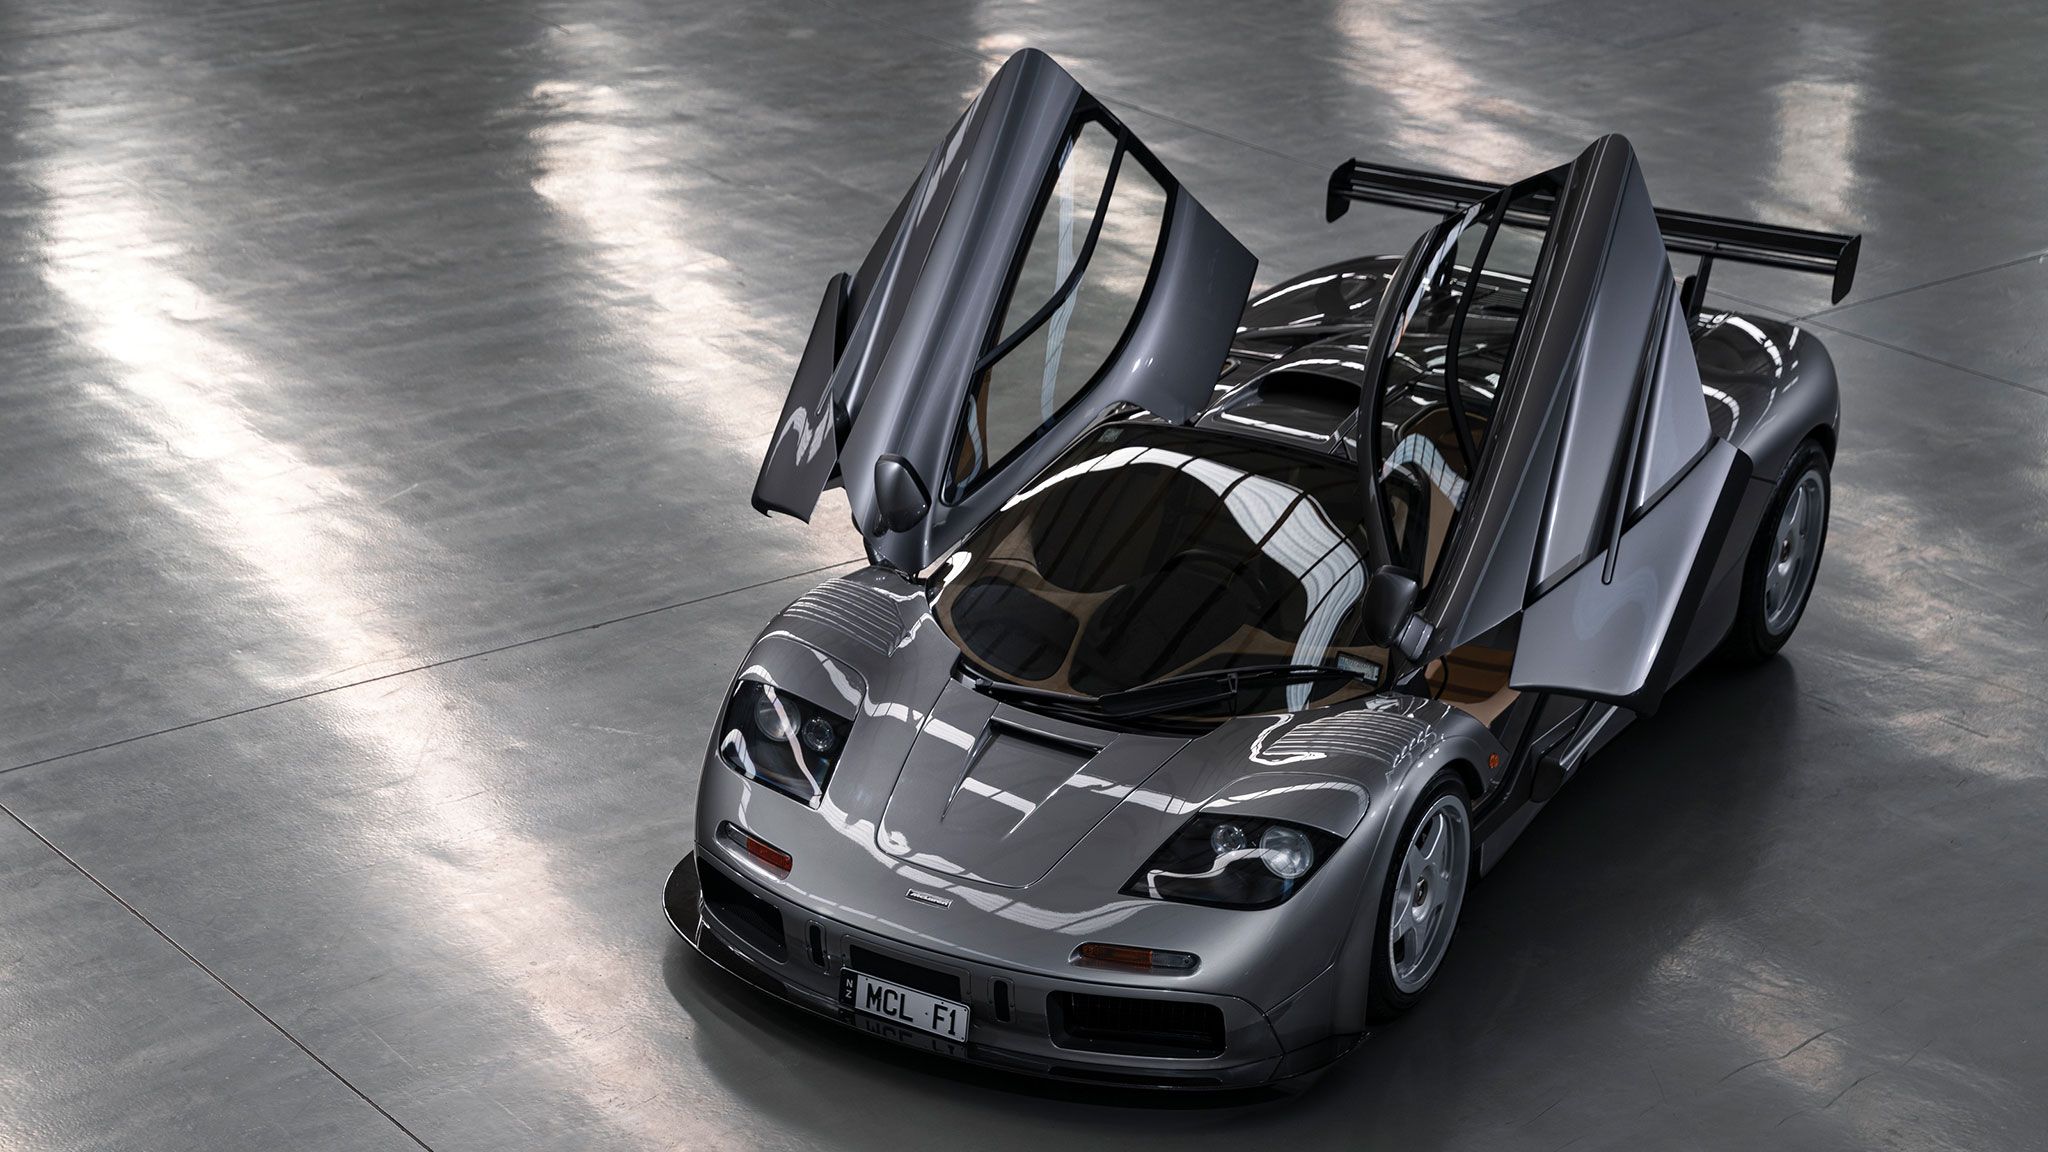 This 1994 McLaren F1 Could Be the Most Valuable Car Sold at Auction This Year